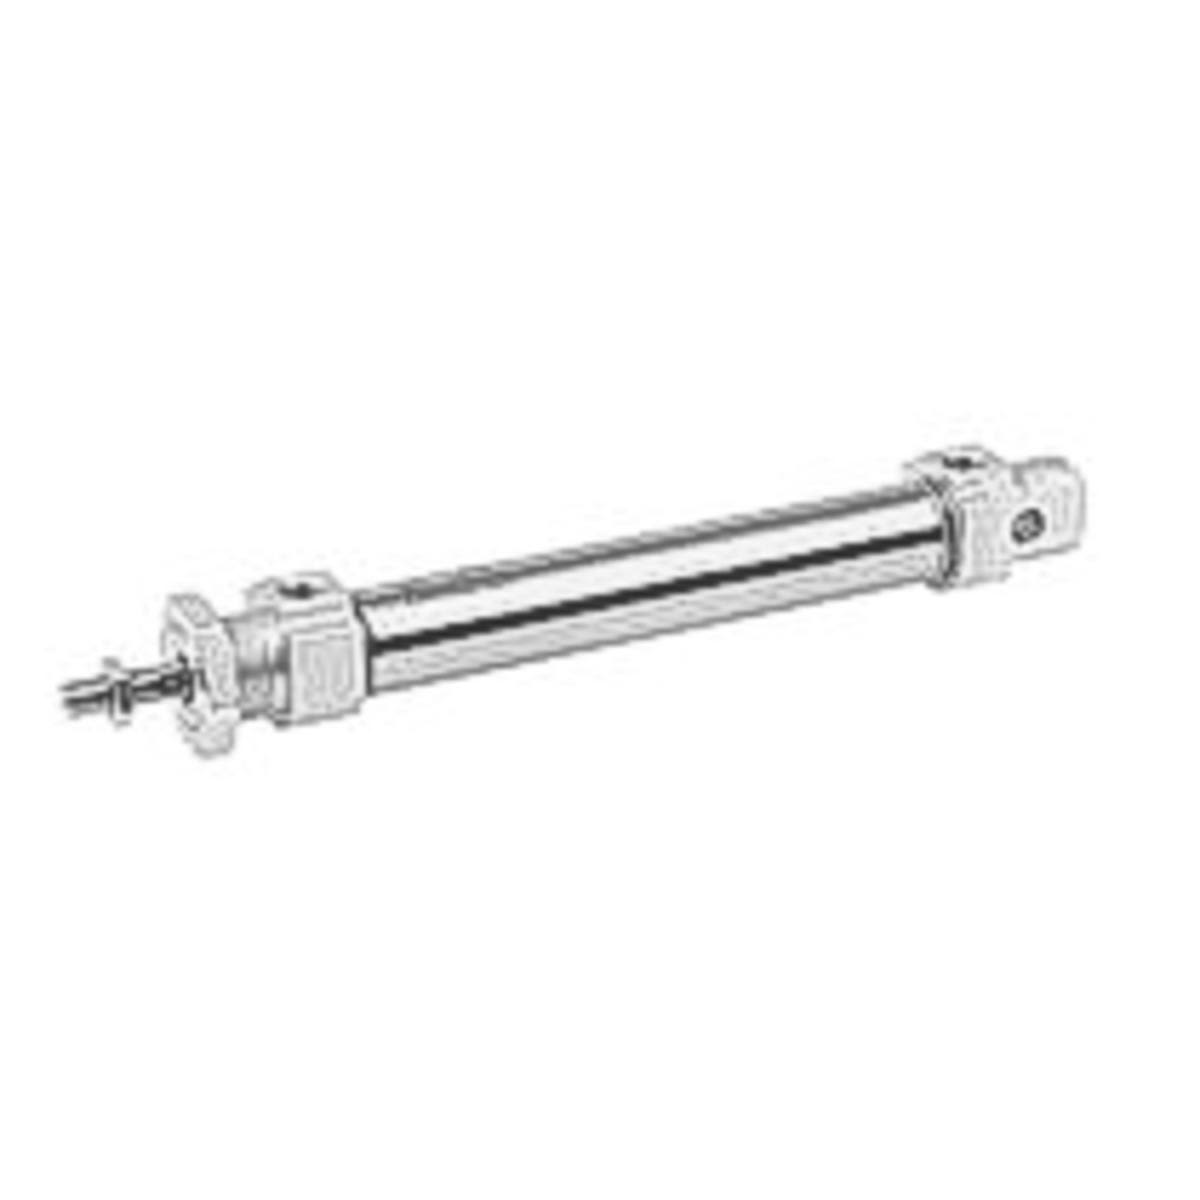 Aventics Pneumatic Cylinder - 25mm Bore, 100mm Stroke, MNI Series, Double Acting